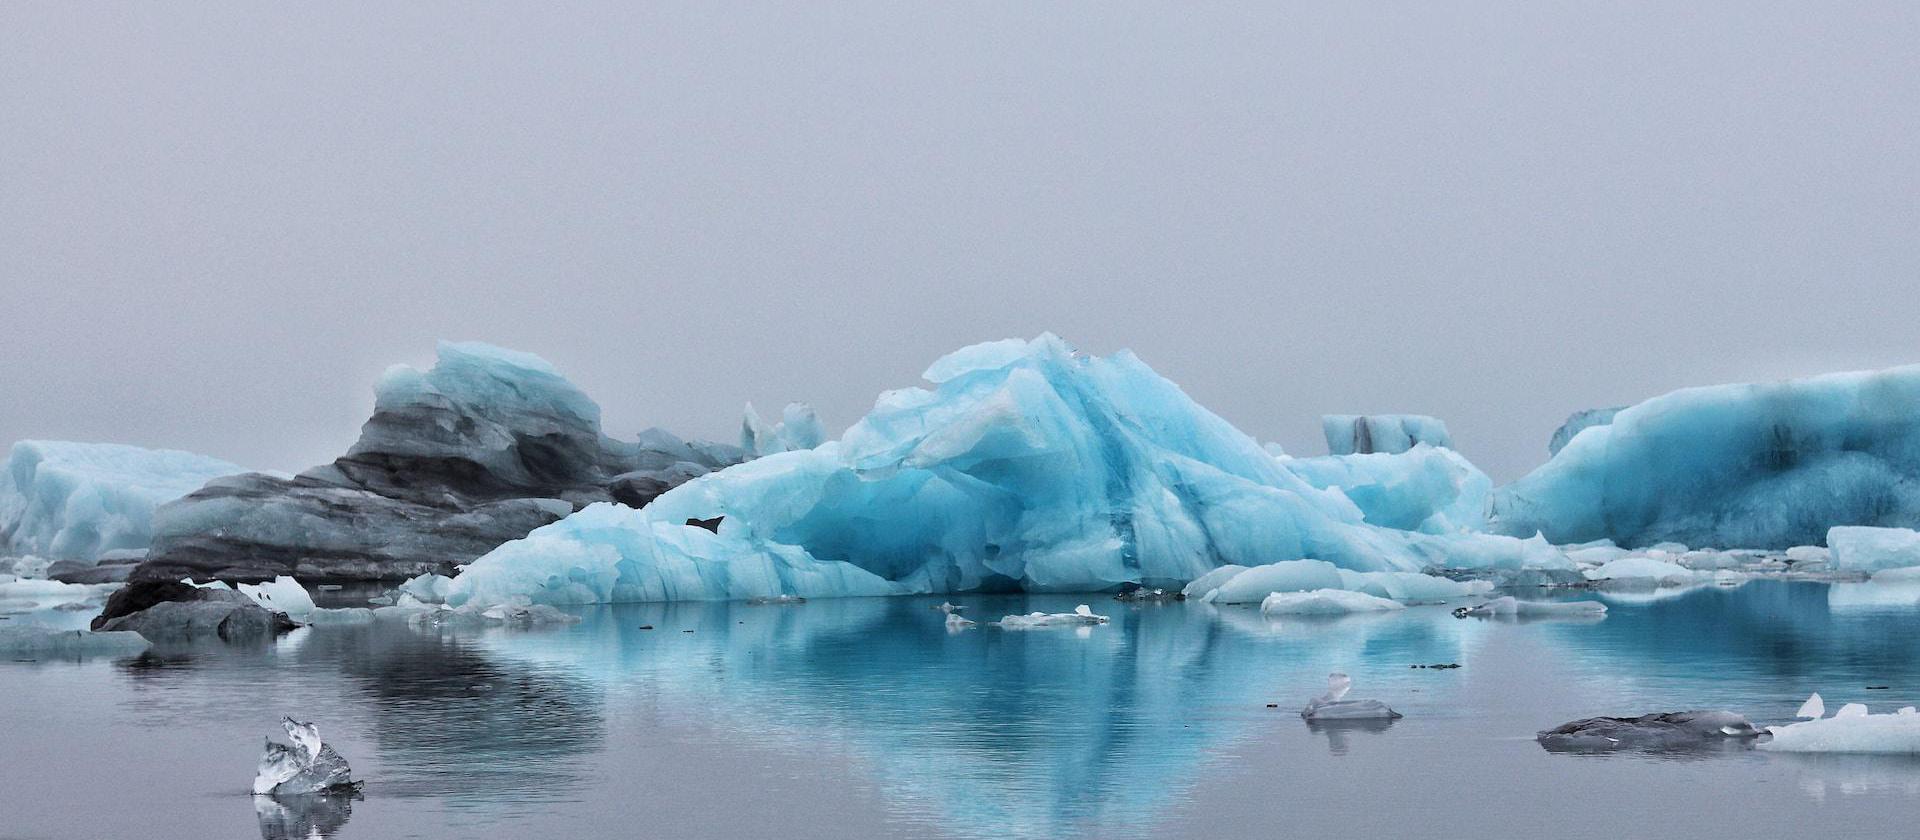 Image of icebergs on body of water.